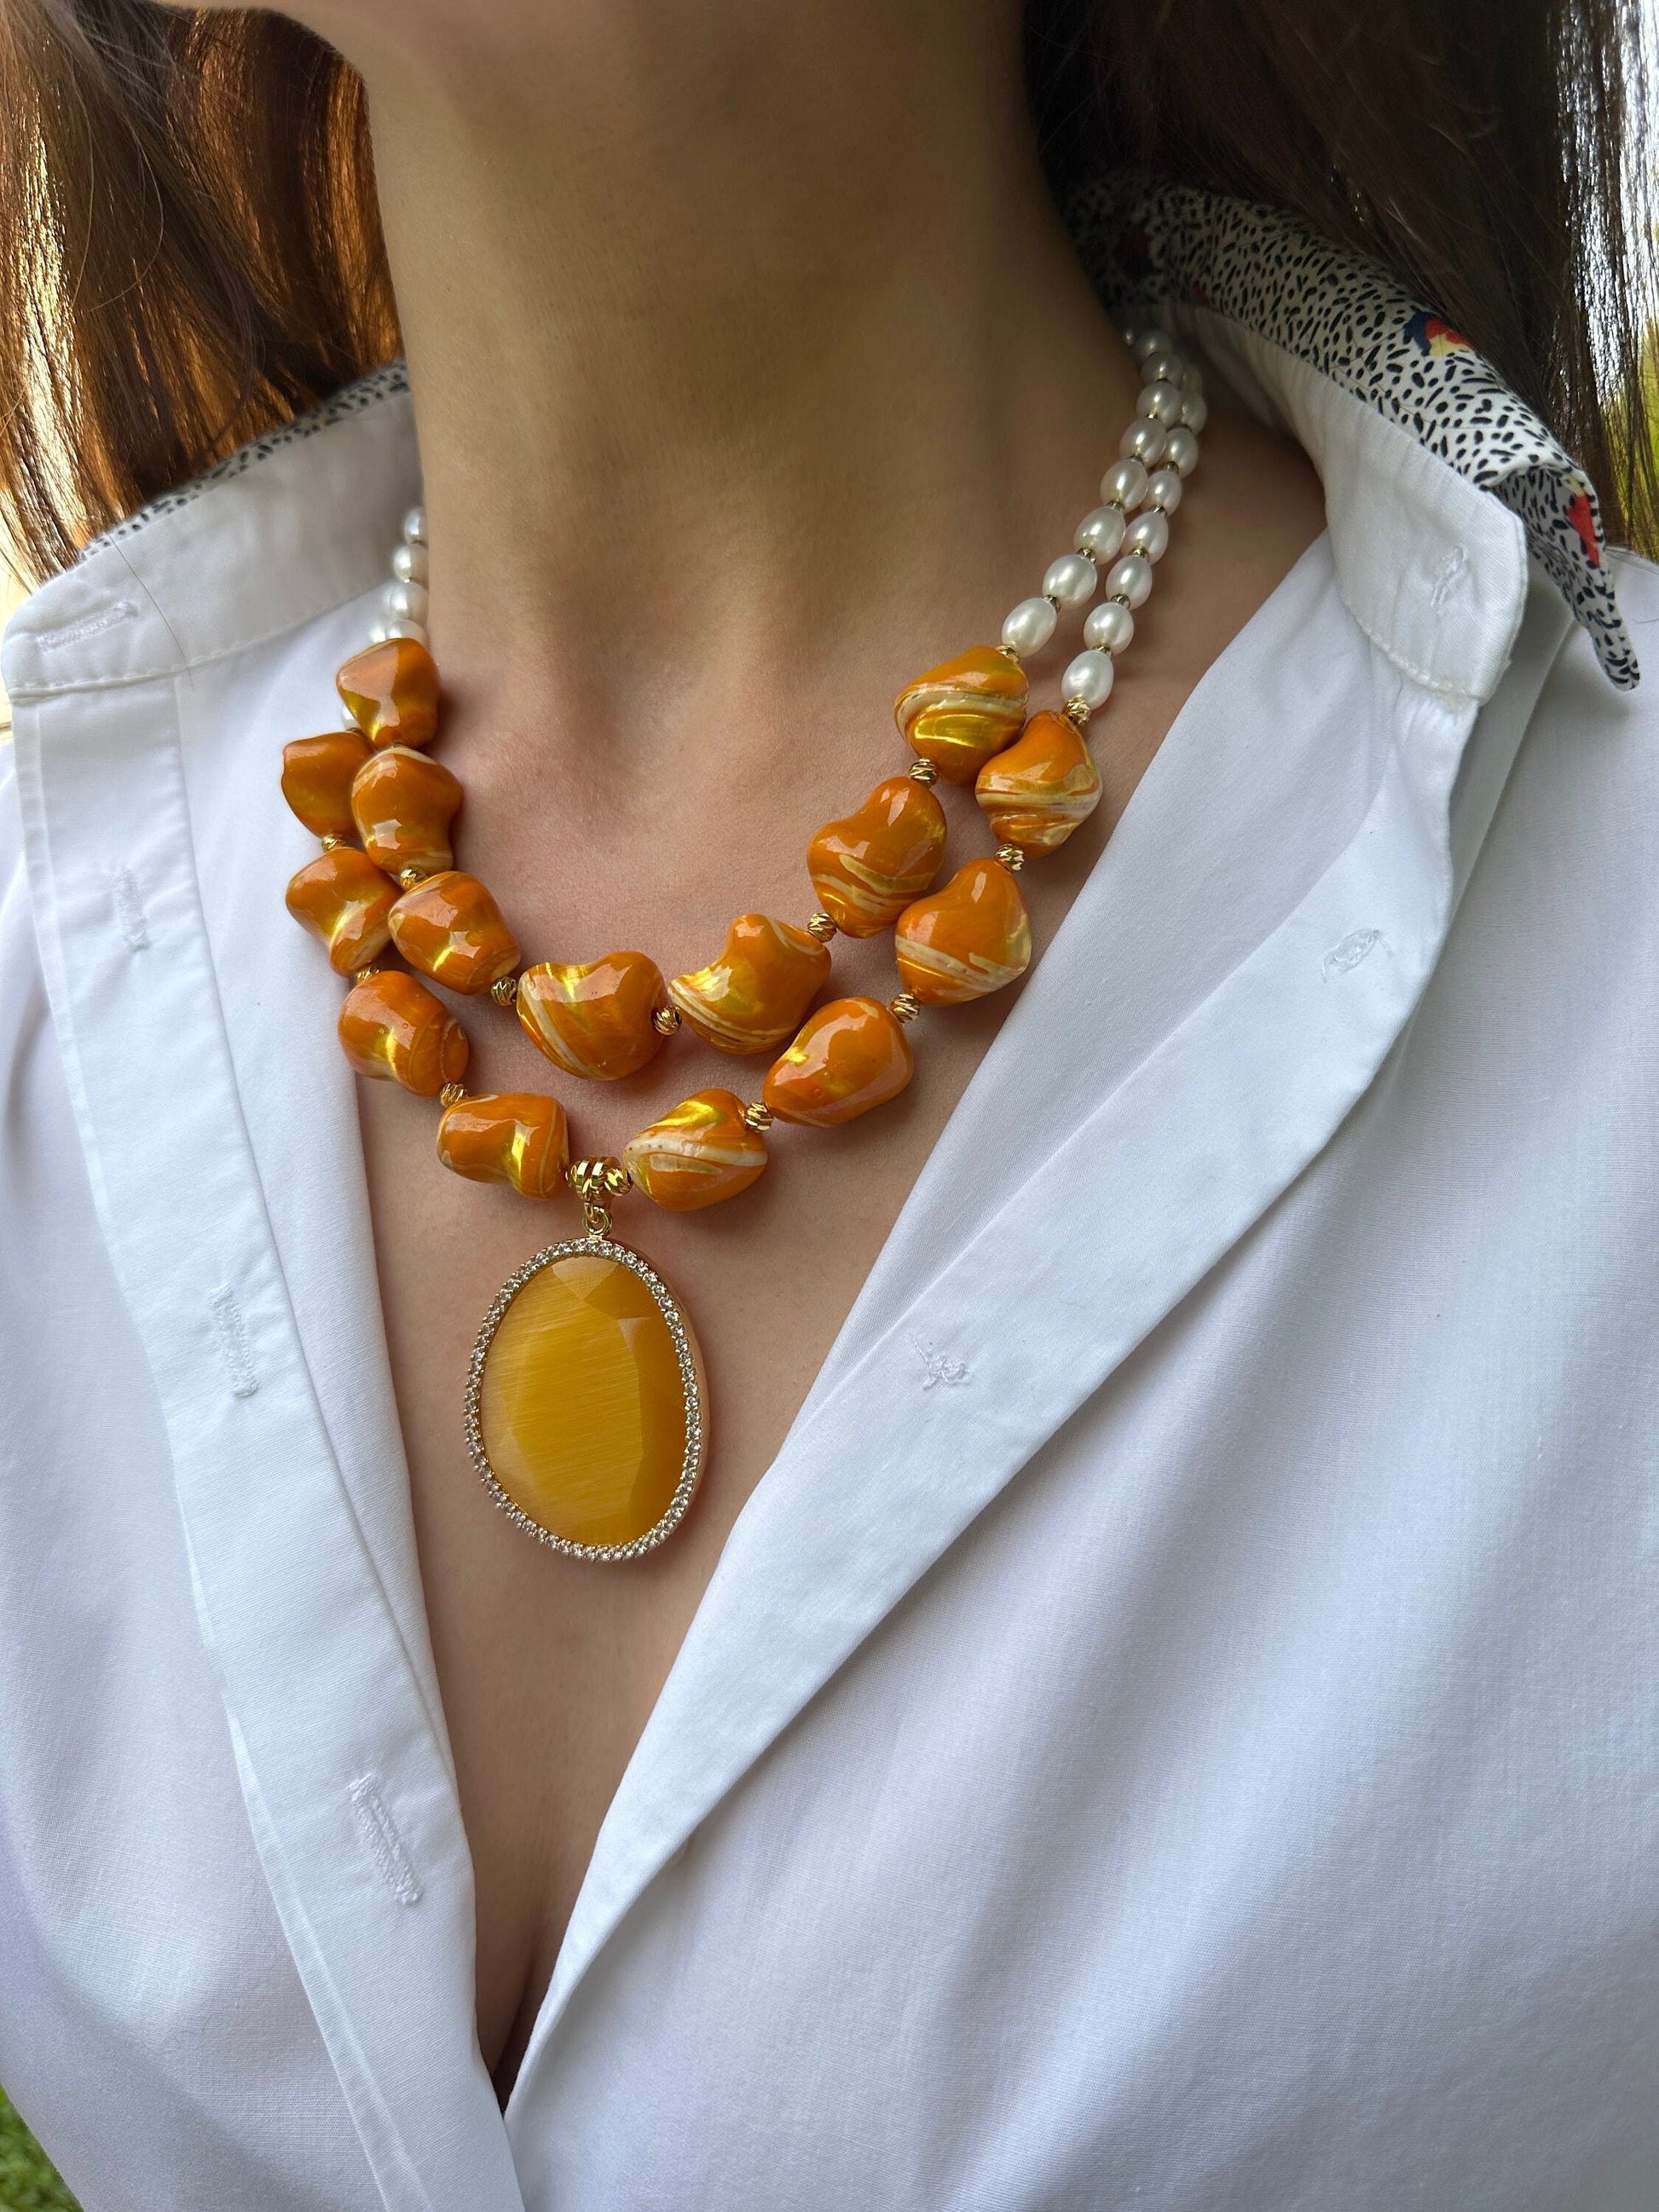 Pearl Necklace, Hot Yellow Shell Necklace, Beaded Handmade Jewelry, Statement Necklace for Birthday Gift, Summer Jewelry